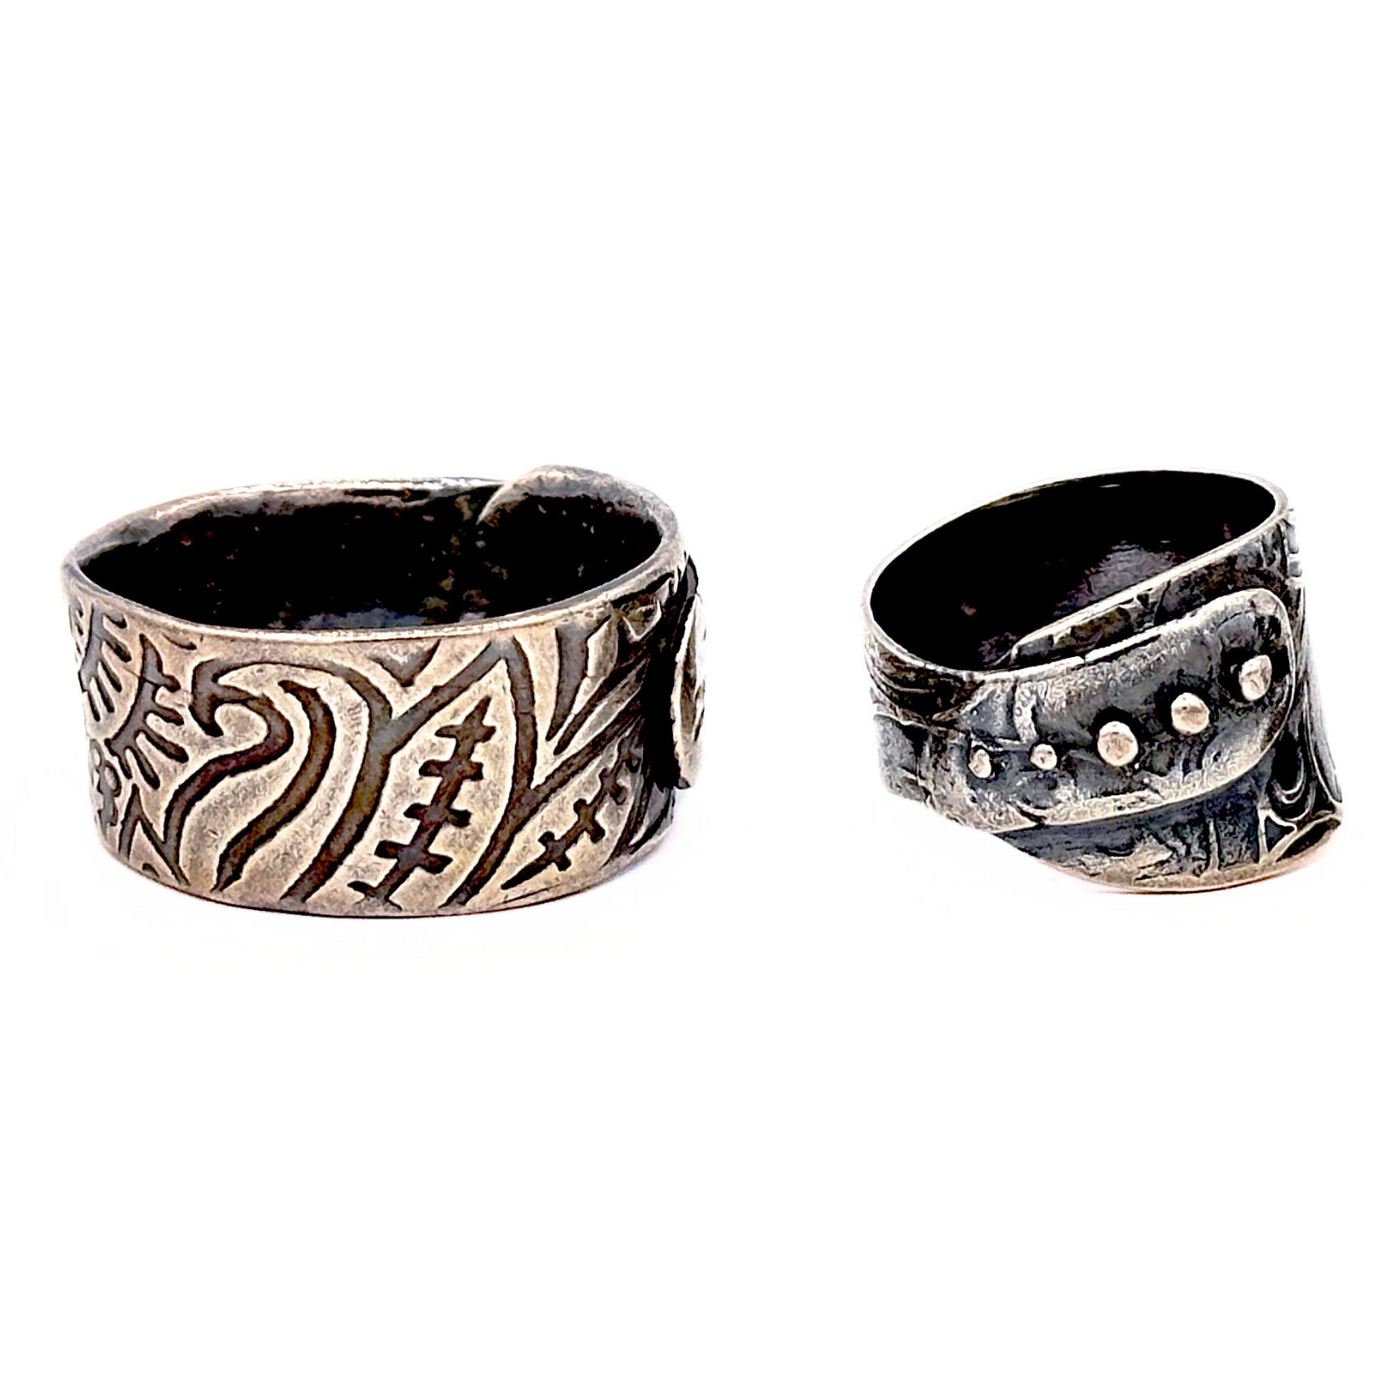 Metal Clay Wrap Ring with Tammy Honaman May 15, 1-5pm